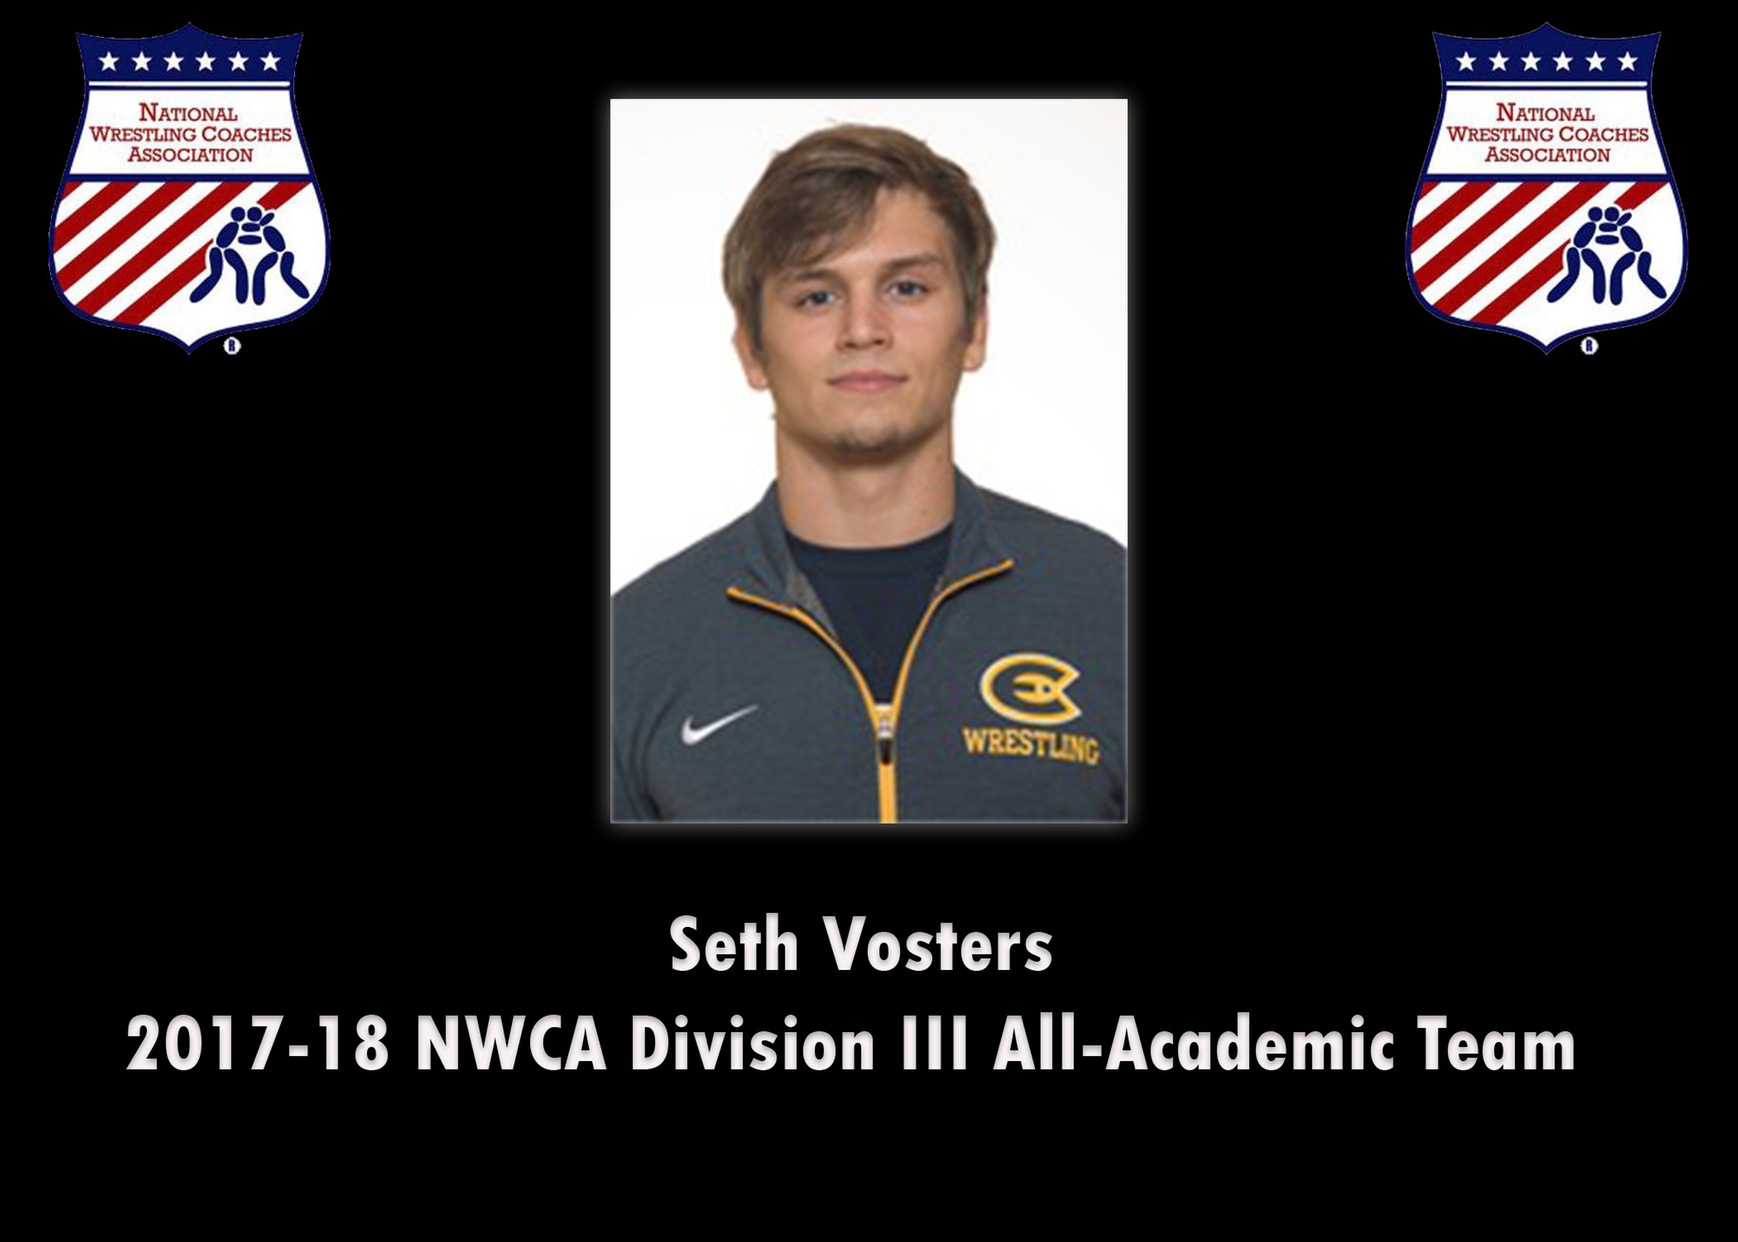 Seth Vosters named to NWCA Division III All-Academic Team